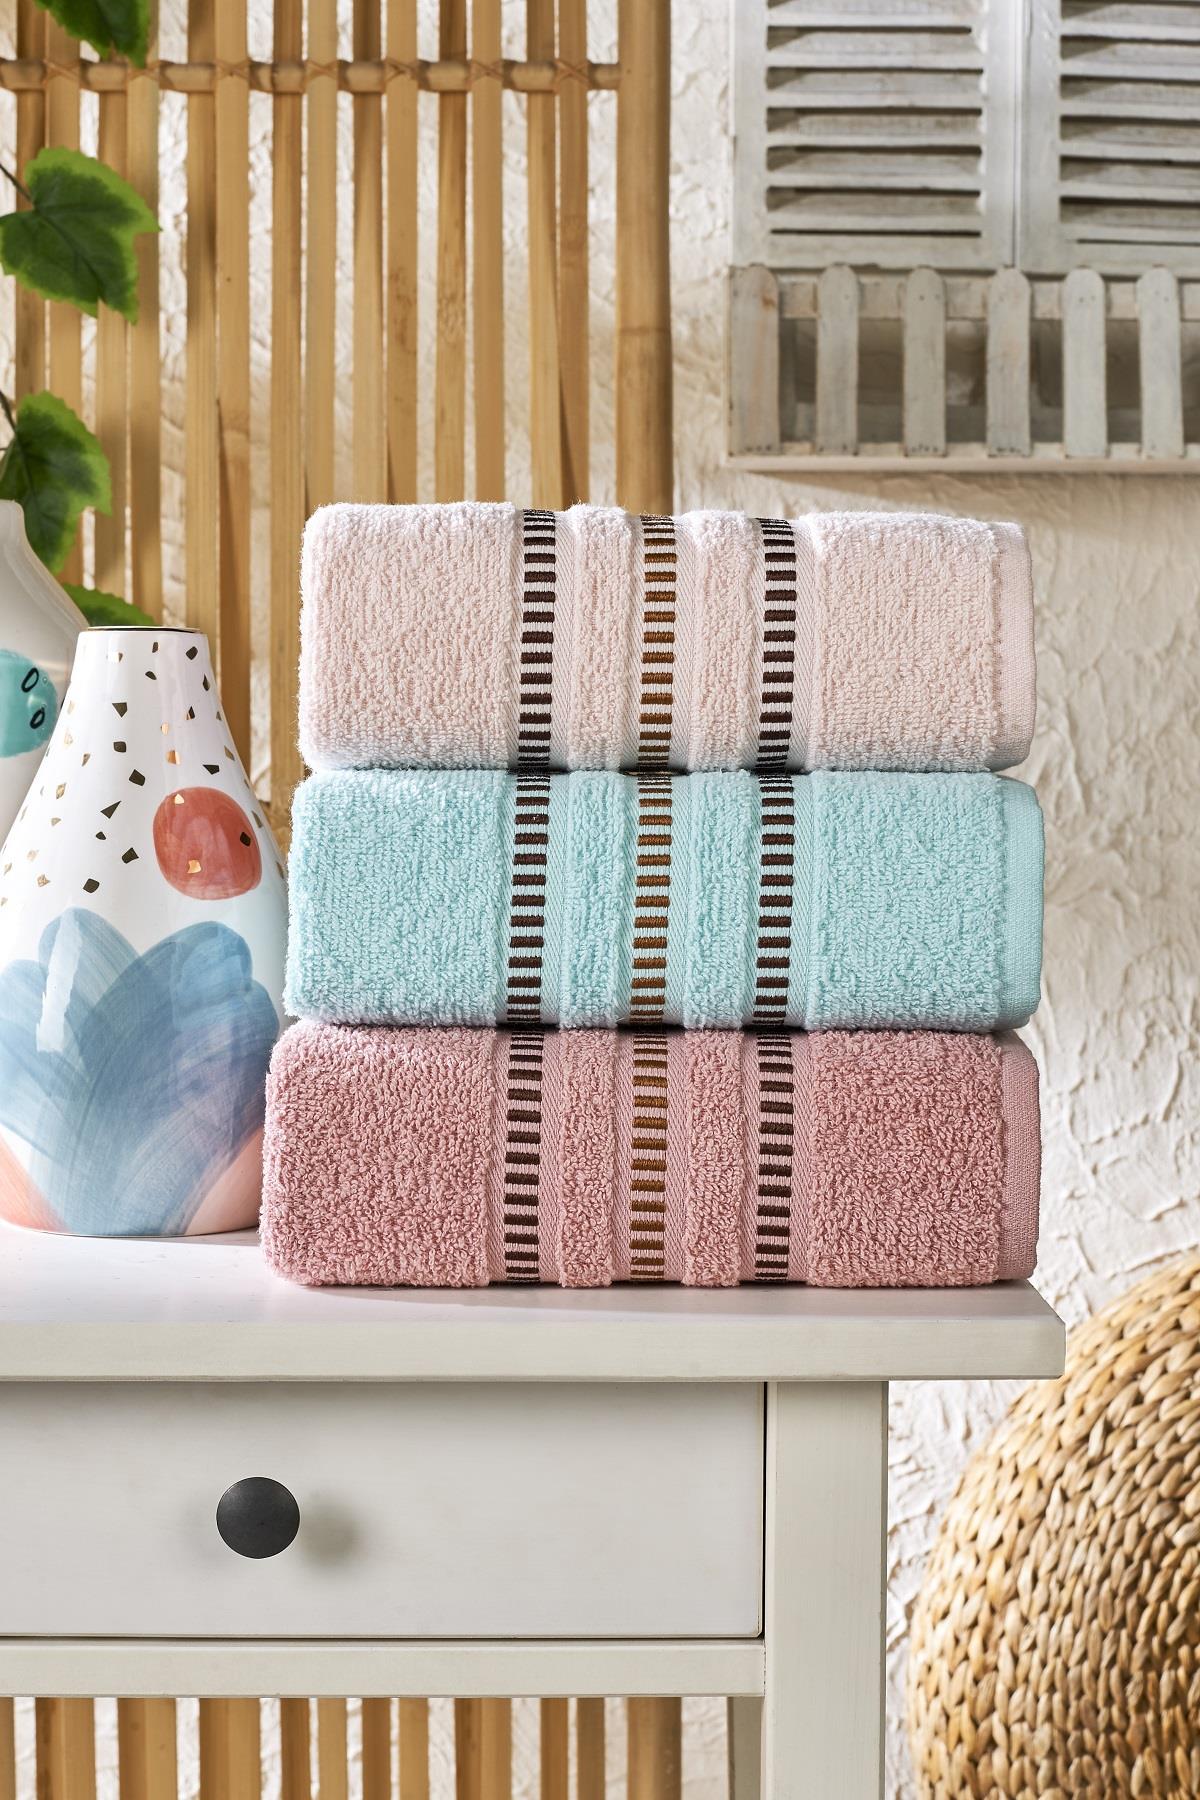 Elevate Your Home with Semecca's Lia Soft 3-Piece Towel Set - 100% Cotton Luxury